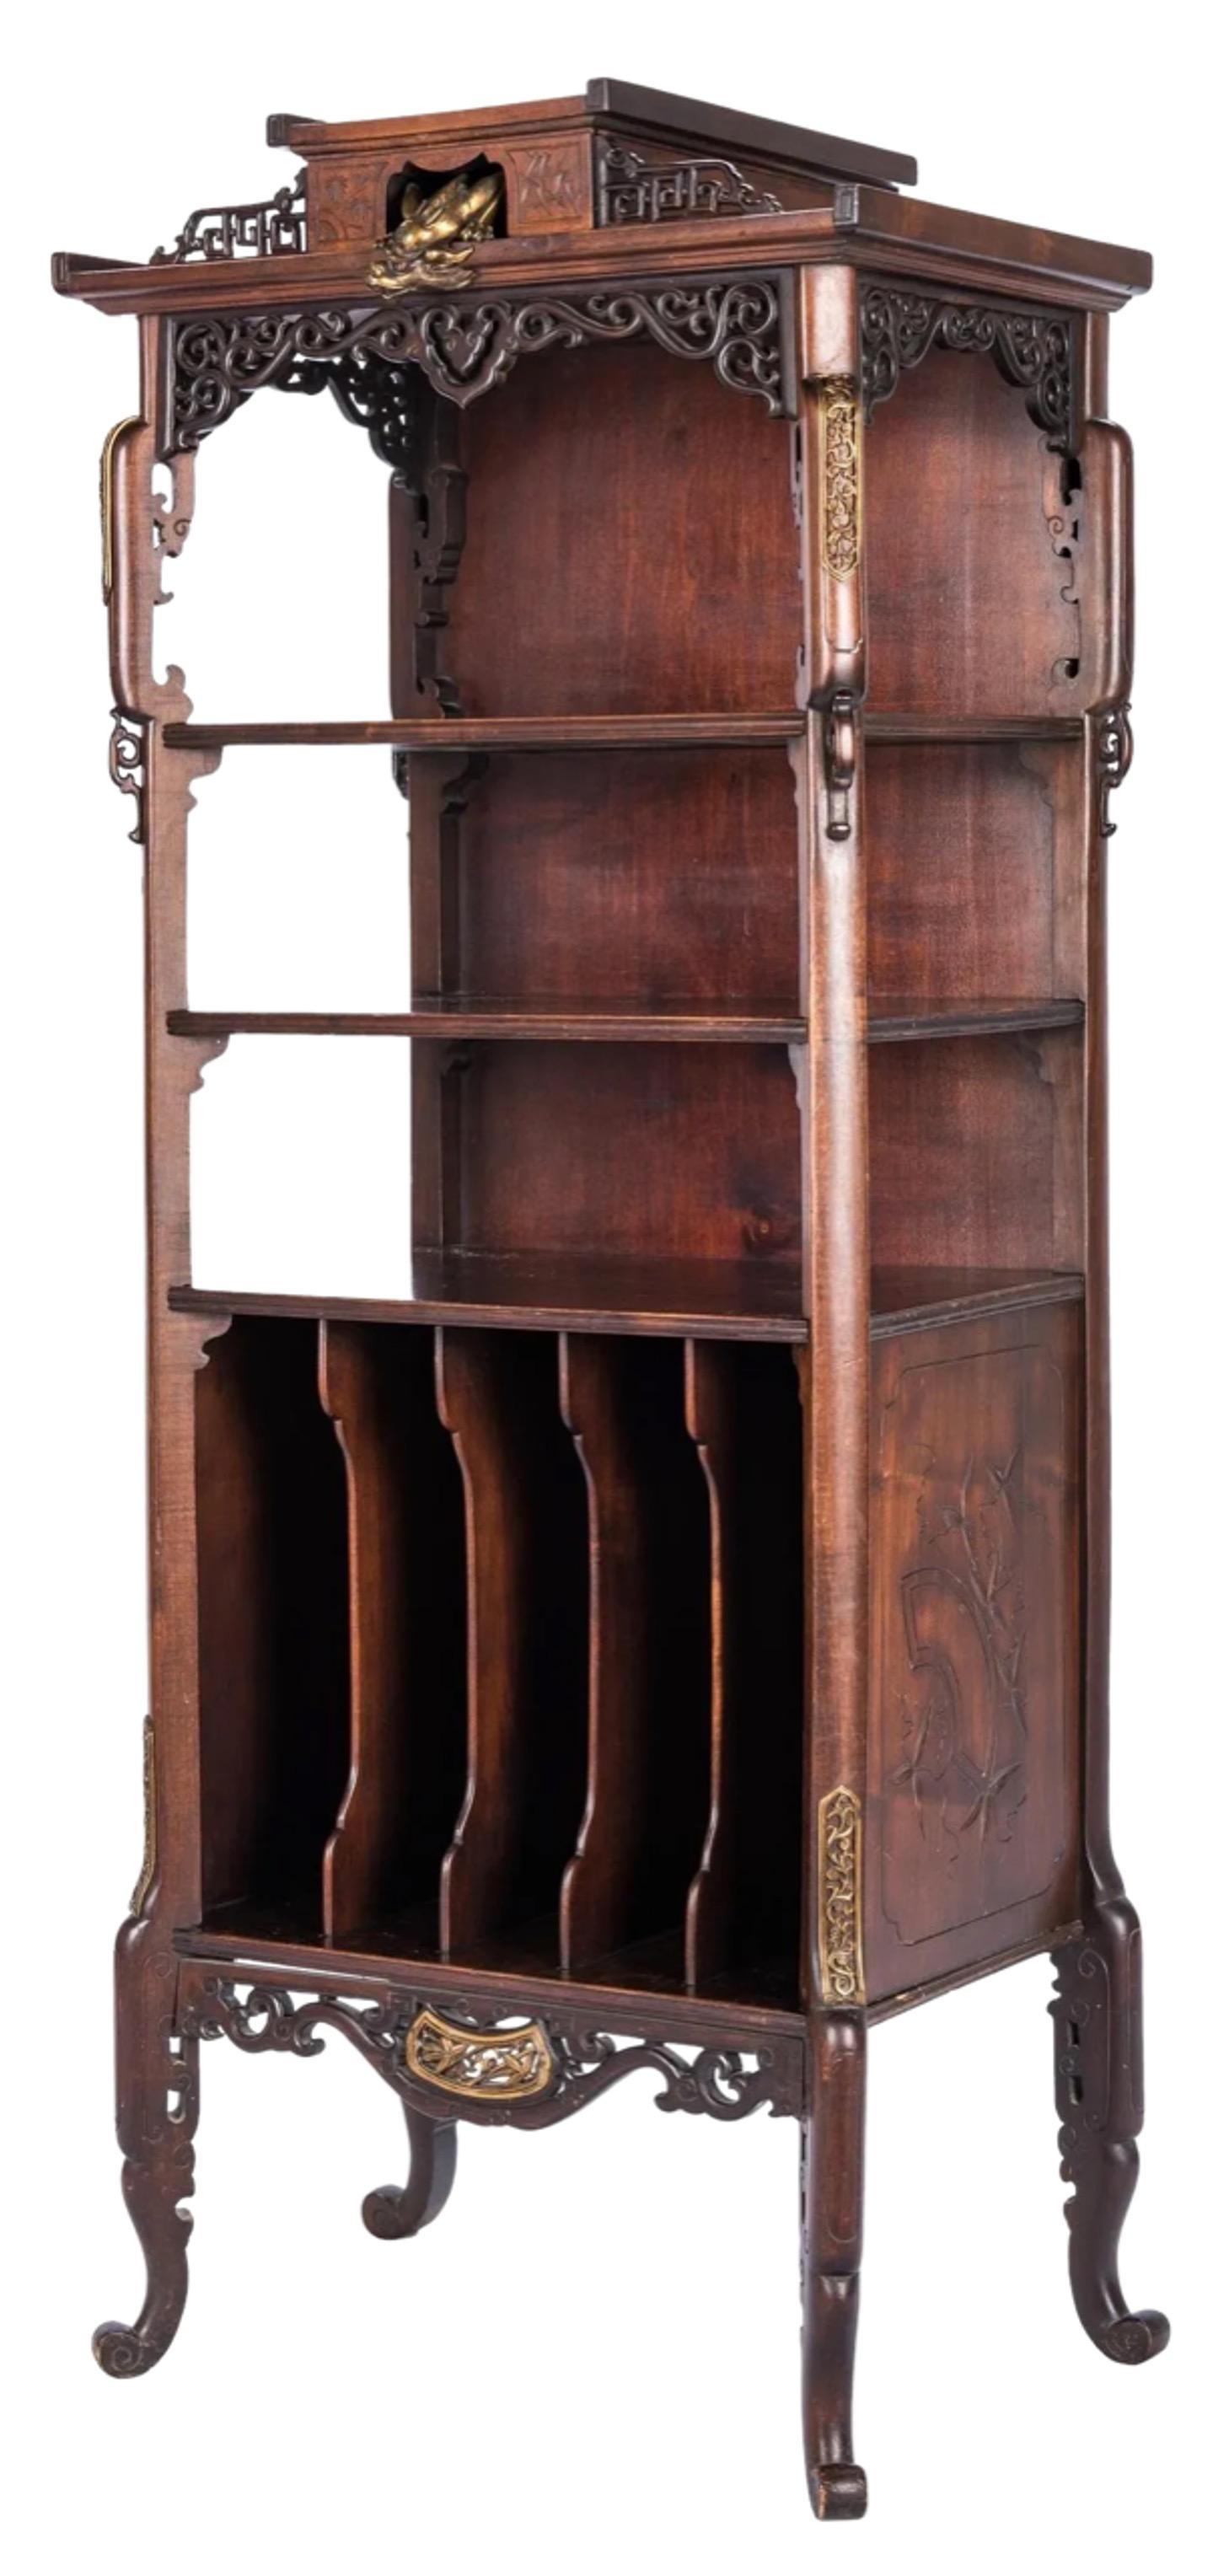 A magnificent 19th-century French chinoiserie music cabinet created by the renowned artist Gabriel Viardot (France, 1888-1964) graces this exceptional piece, bearing the artist's signature proudly on one of its legs. This music etagere, elegantly